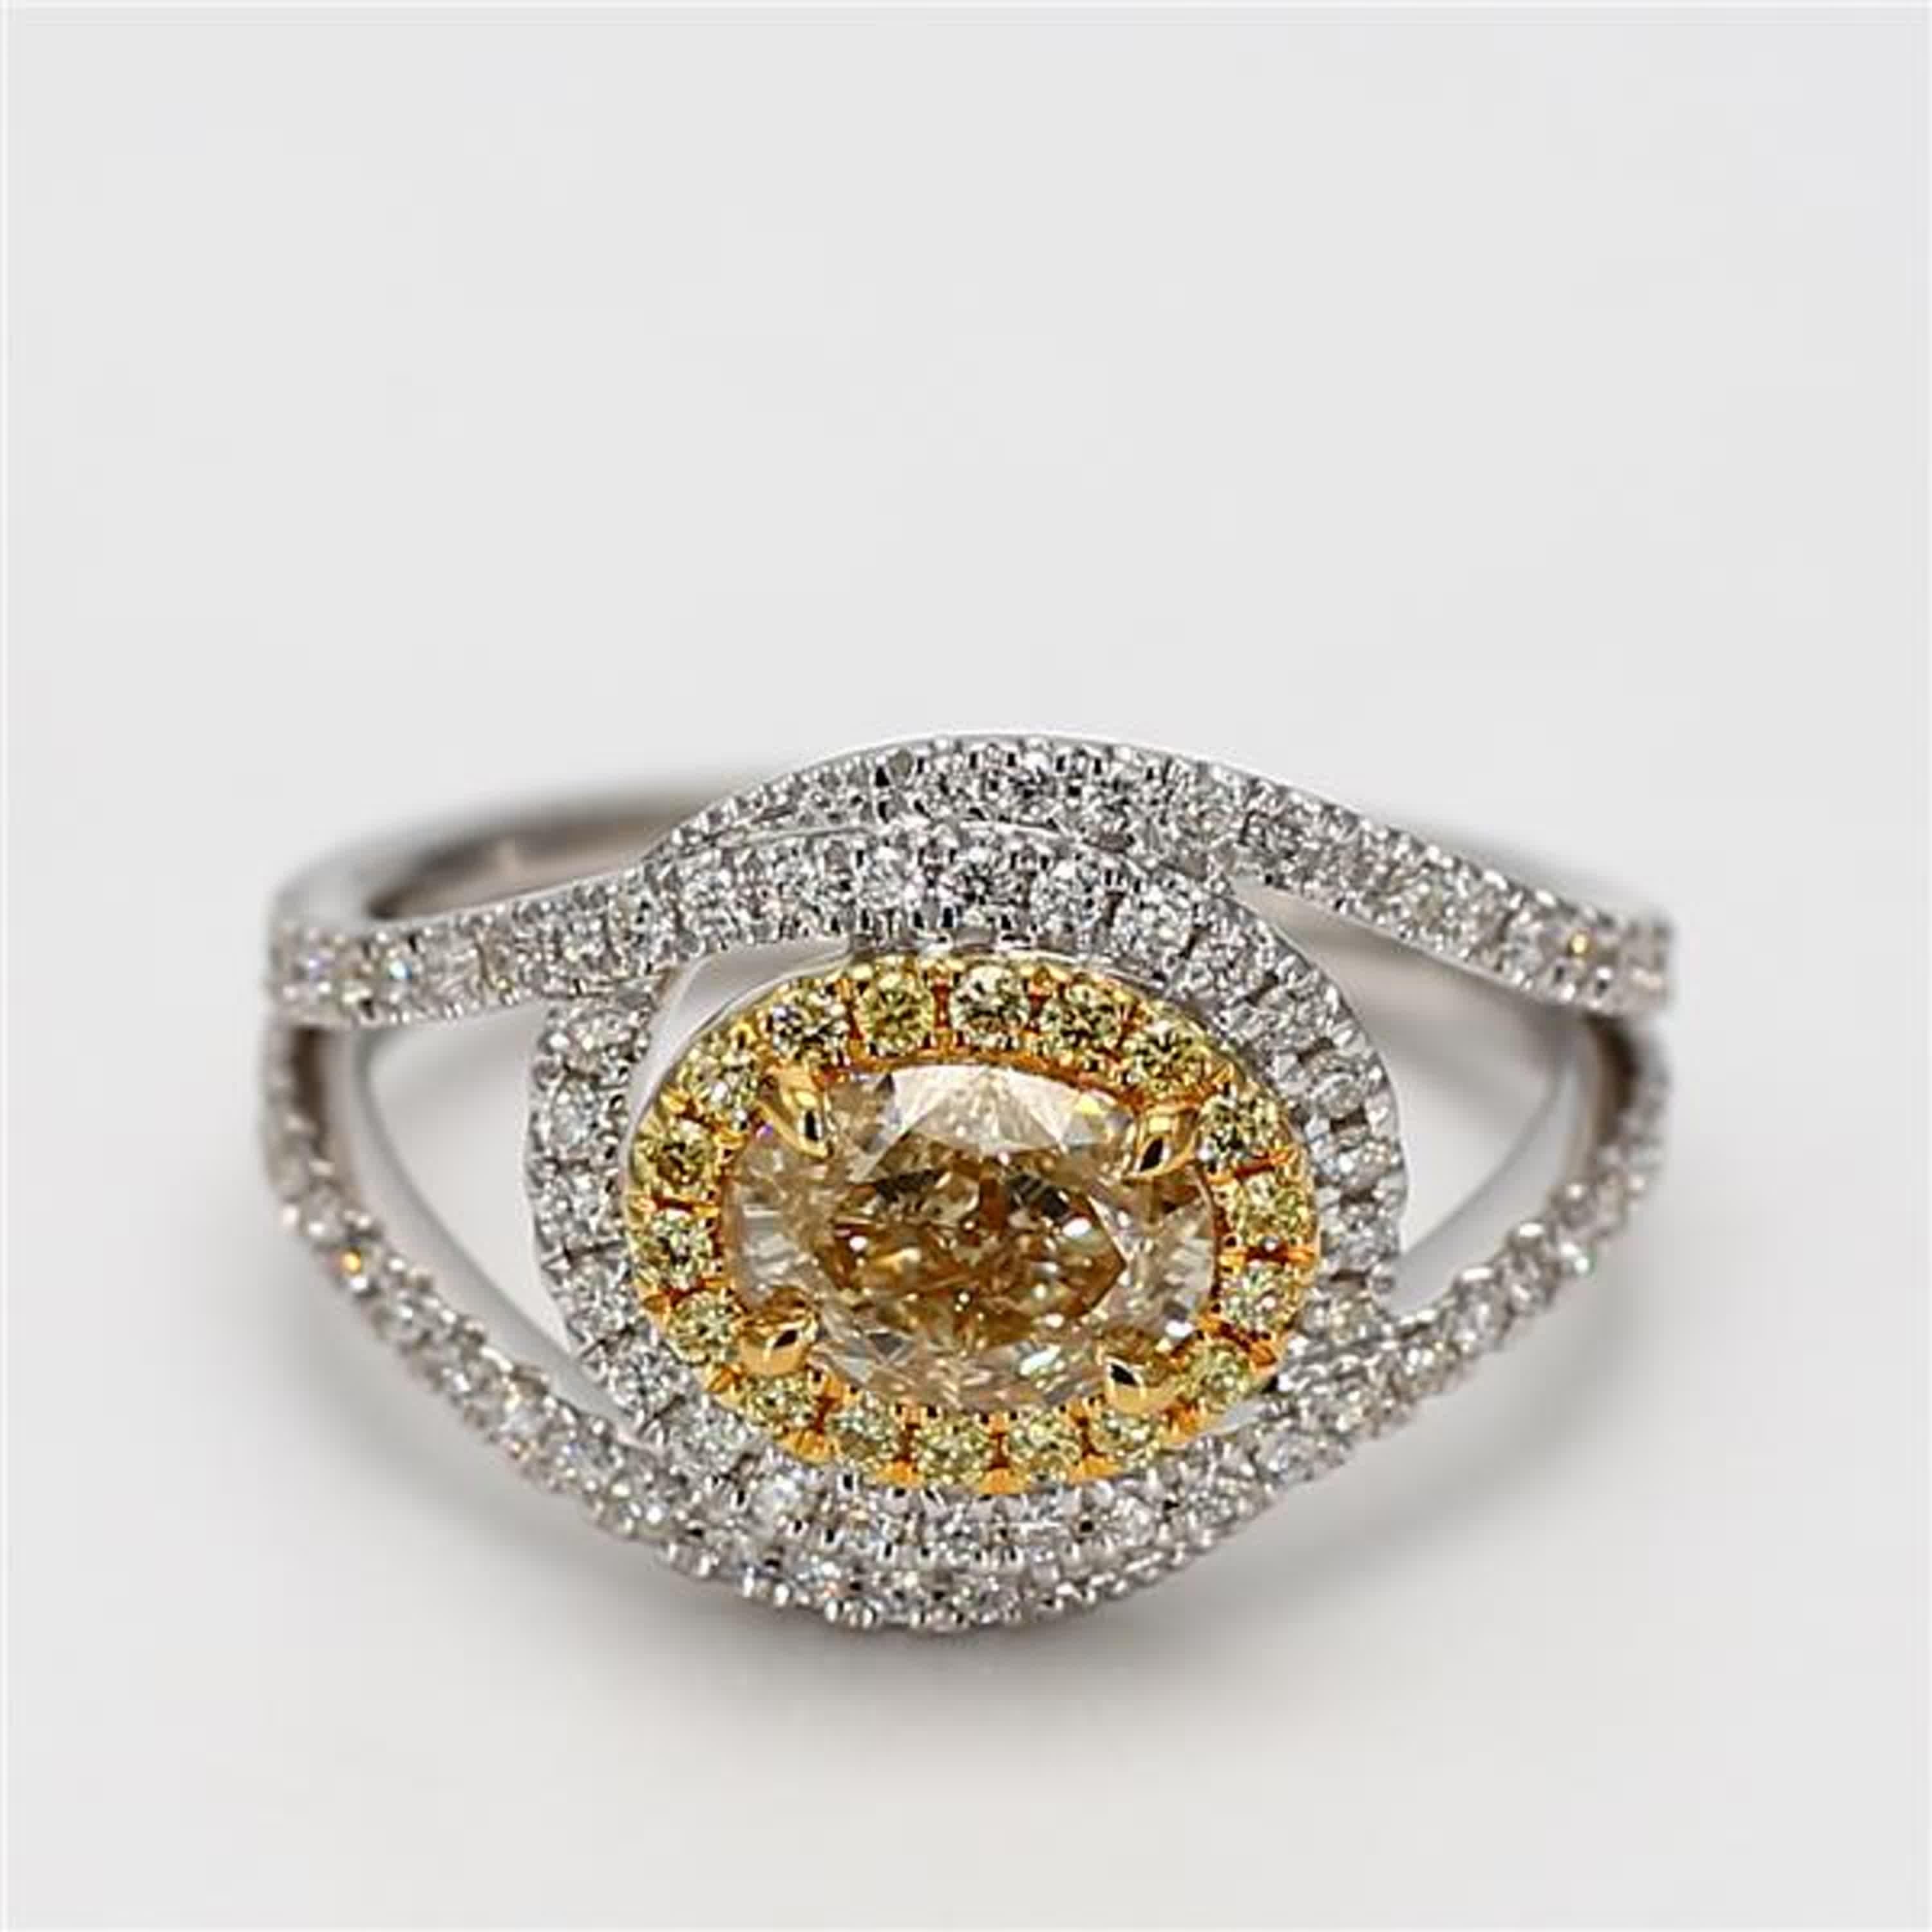 RareGemWorld's classic GIA certified diamond ring. Mounted in a beautiful 18K Yellow and White Gold setting with a natural oval cut yellow diamond. The yellow diamond is surrounded by round natural yellow diamond melee and round natural white